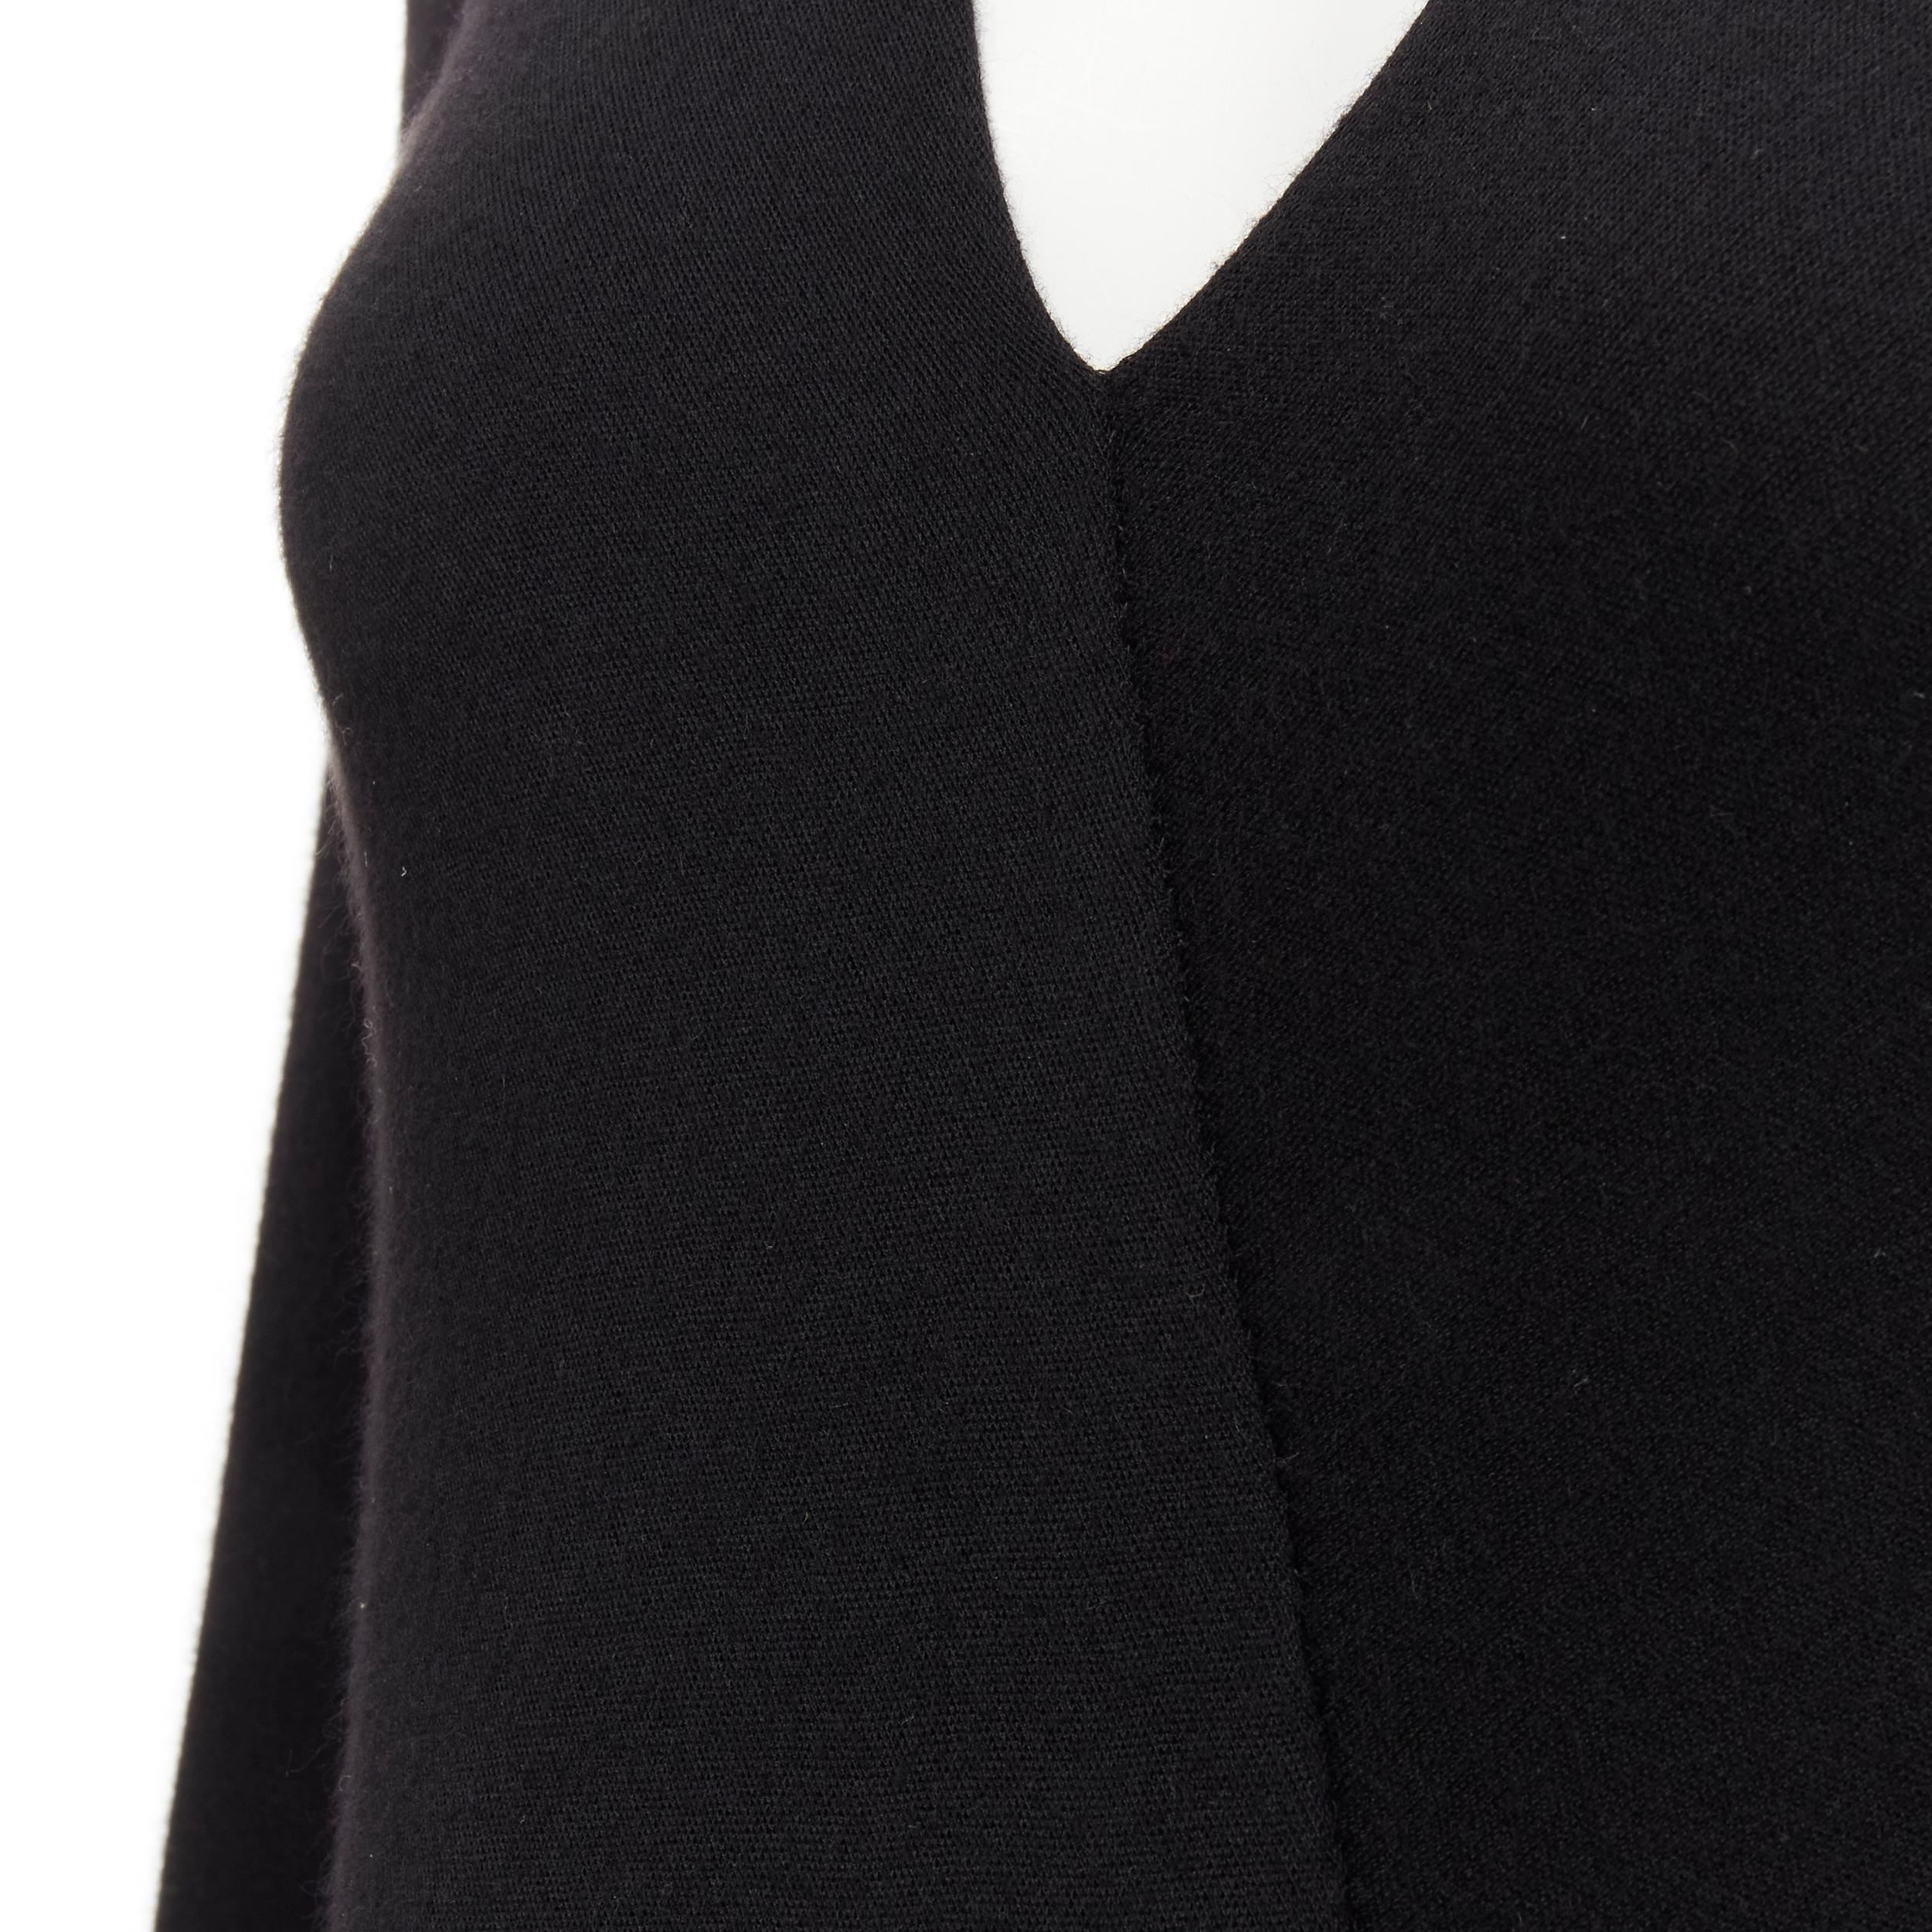 RALPH LAUREN Purple Collection 100% cashmere black wrap long sleeve body top XS 
Reference: LNKO/A01879 
Brand: Ralph Lauren 
Material: Cashmere 
Color: Black 
Pattern: Solid 
Extra Detail: Wrap front. Stretch button bodysuit. 
Made in: USA